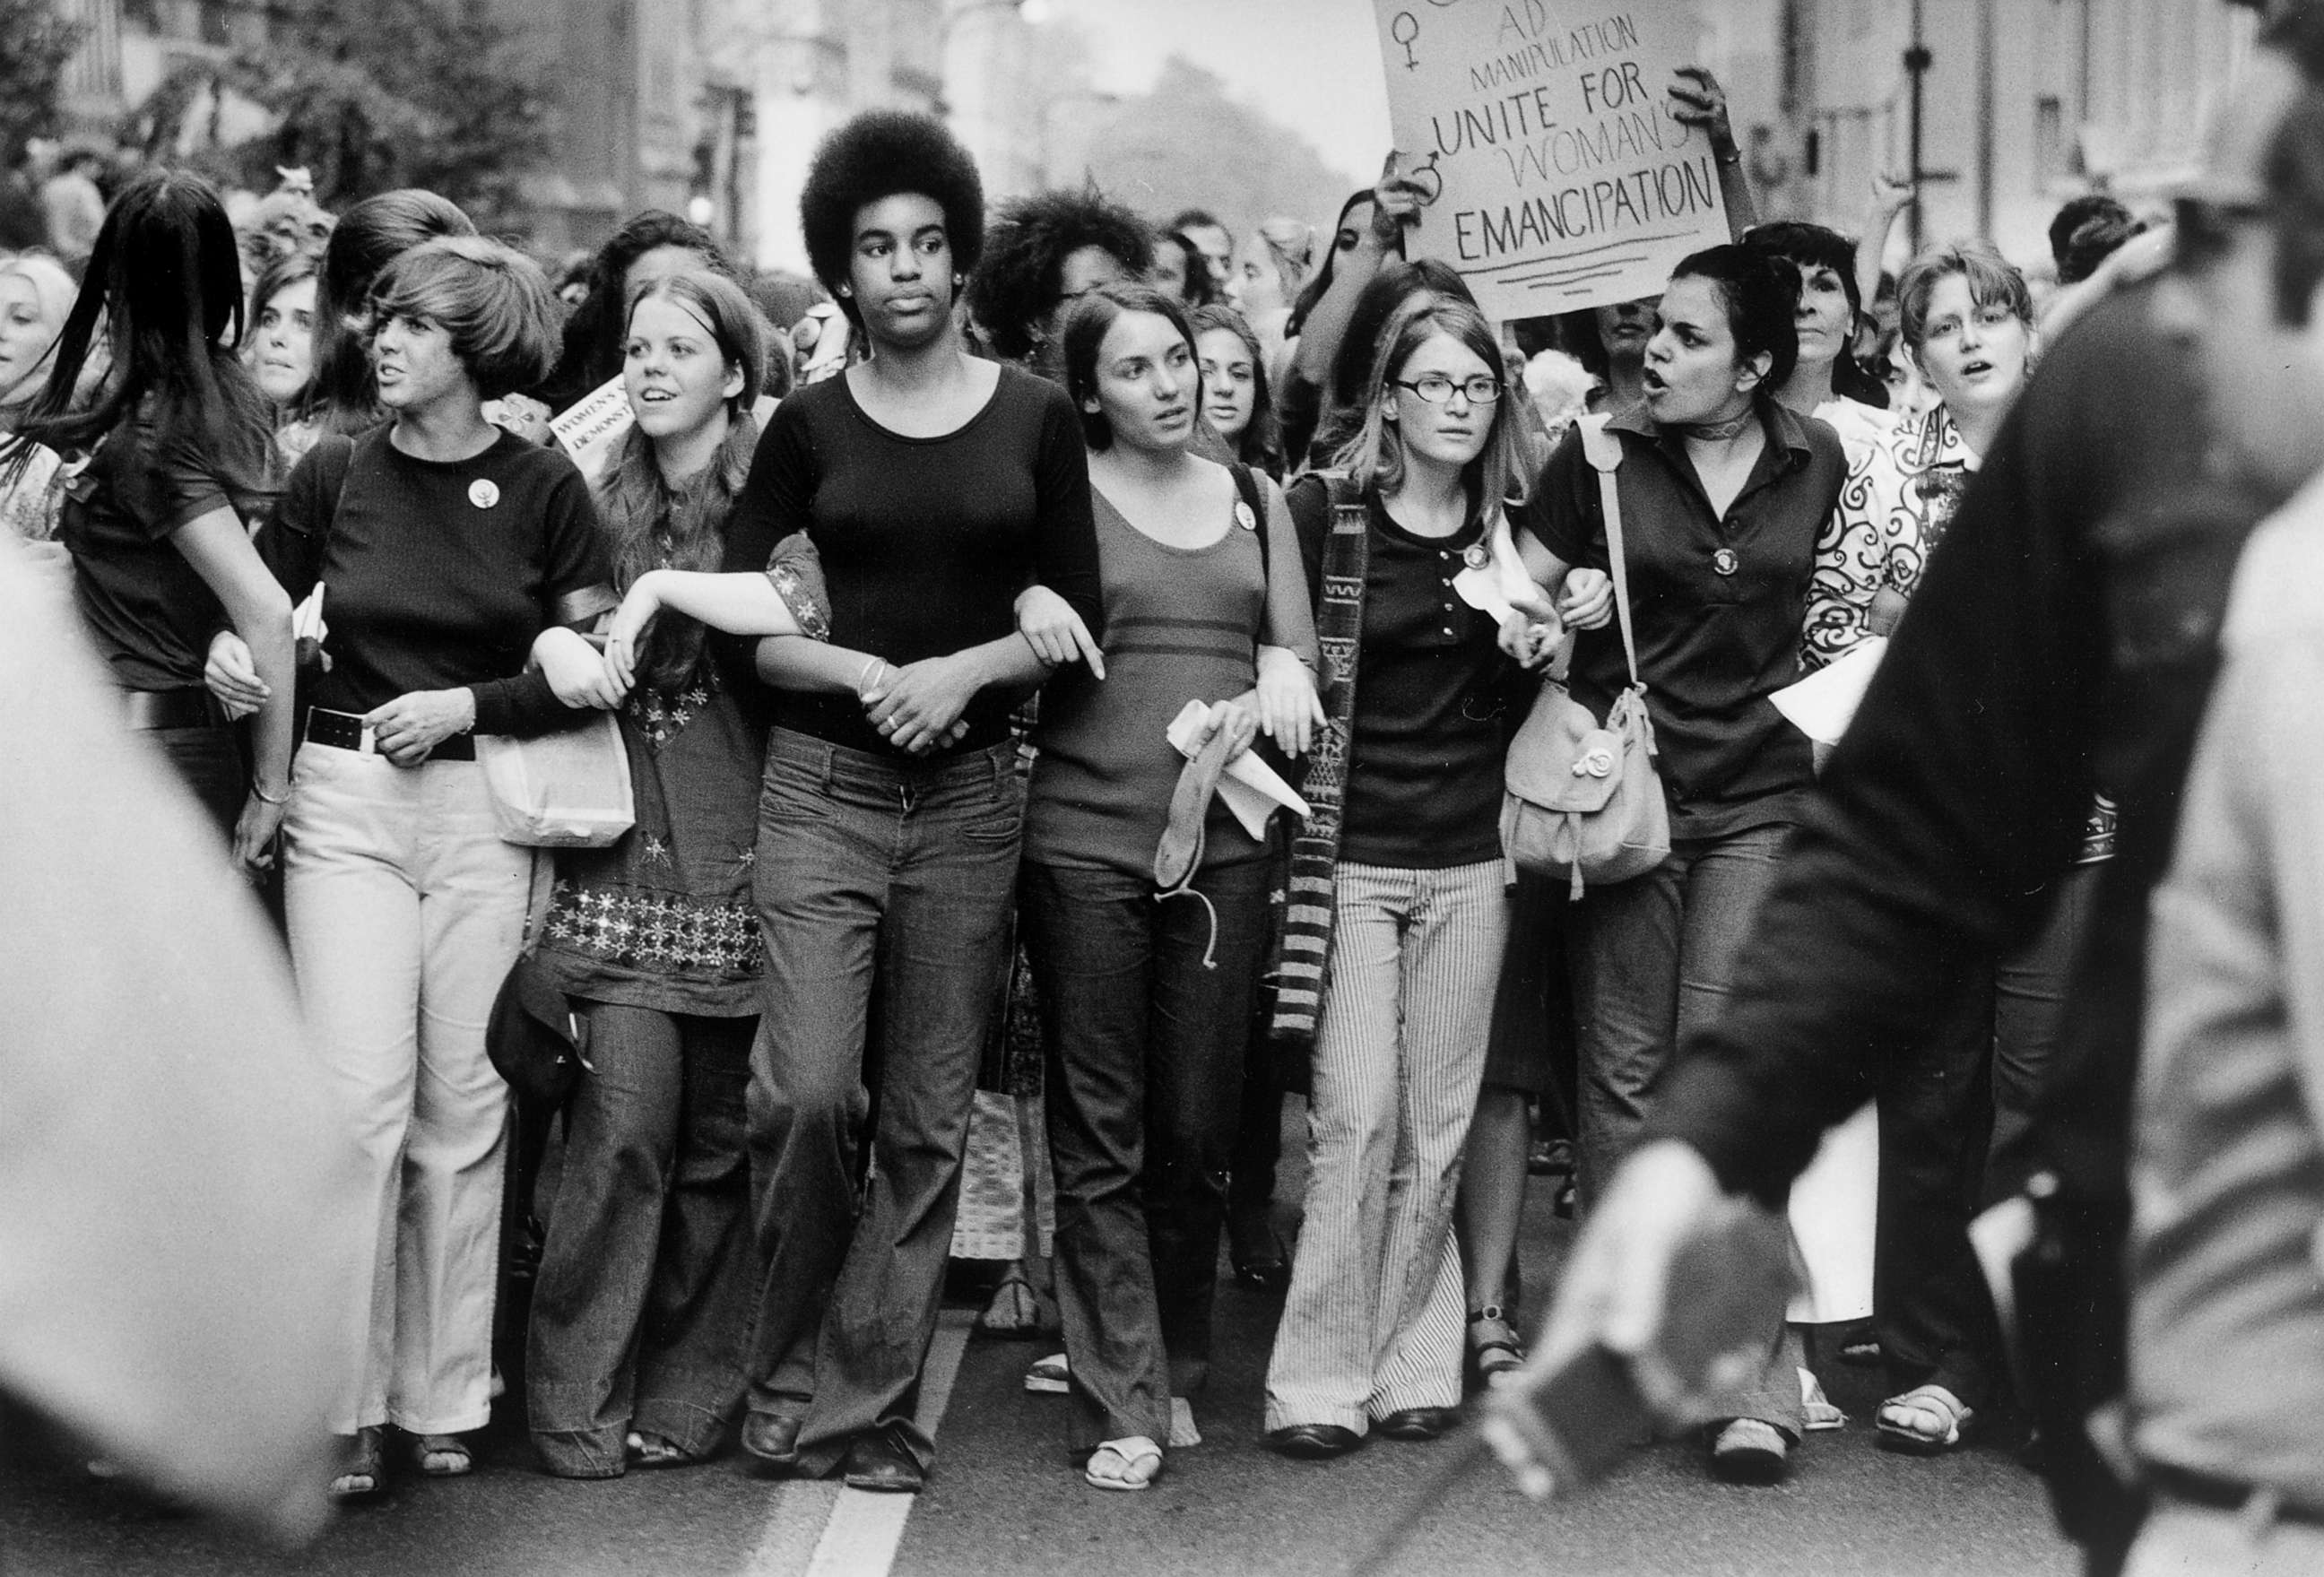 PHOTO: Women march down Fifth Avenue in New York during a Women's Equality March on Aug. 26, 1970, organized by the National Organization for Women to commemorate the 50th anniversary of the passing of the Nineteenth Amendment.